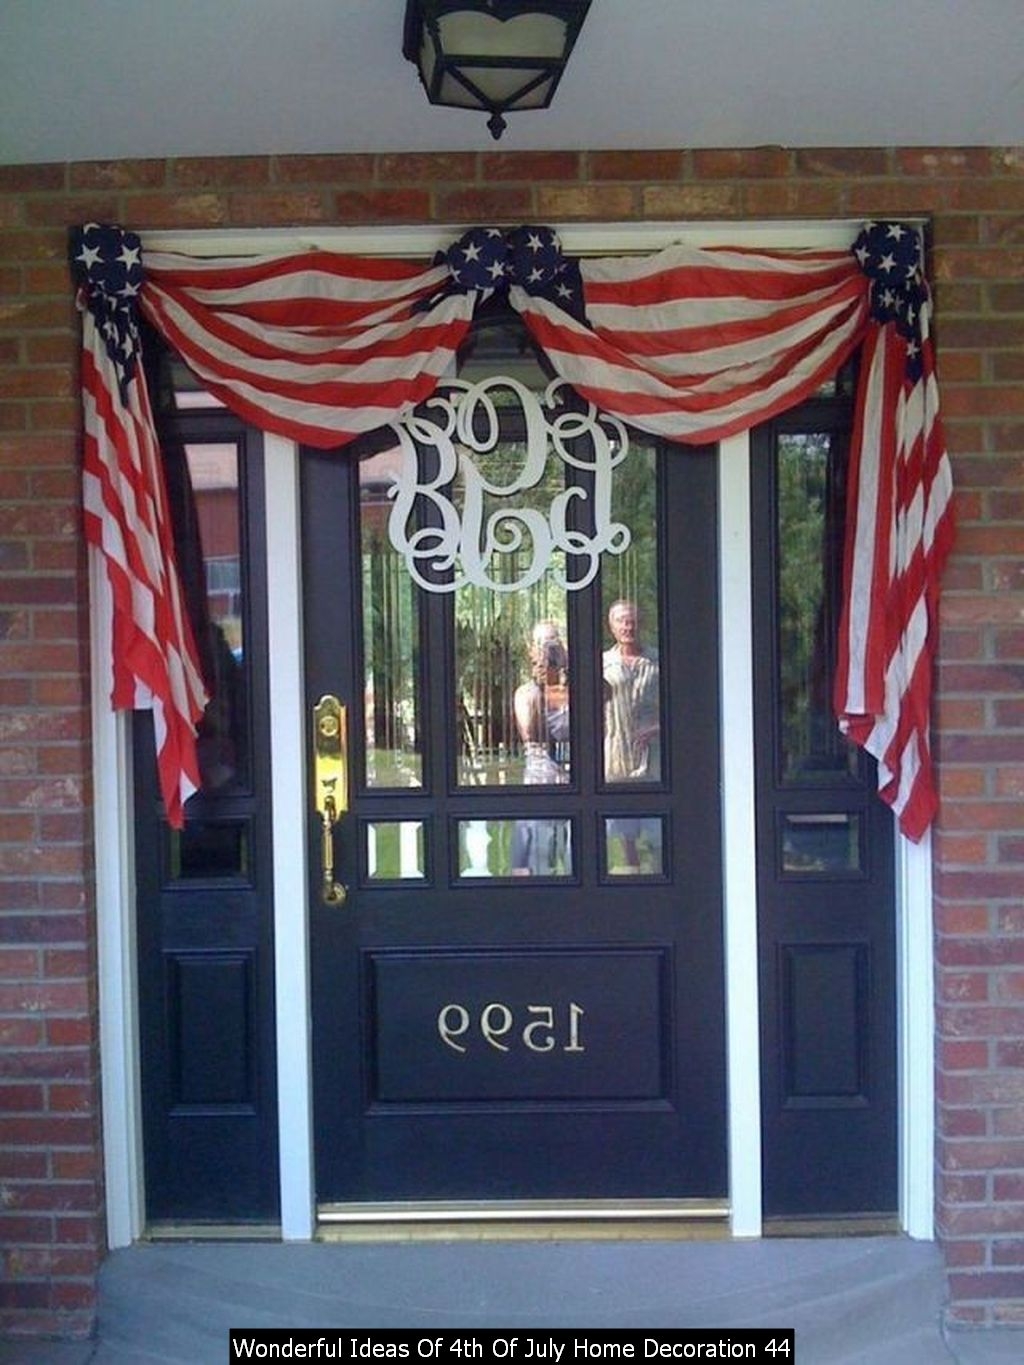 Wonderful Ideas Of 4th Of July Home Decoration 44